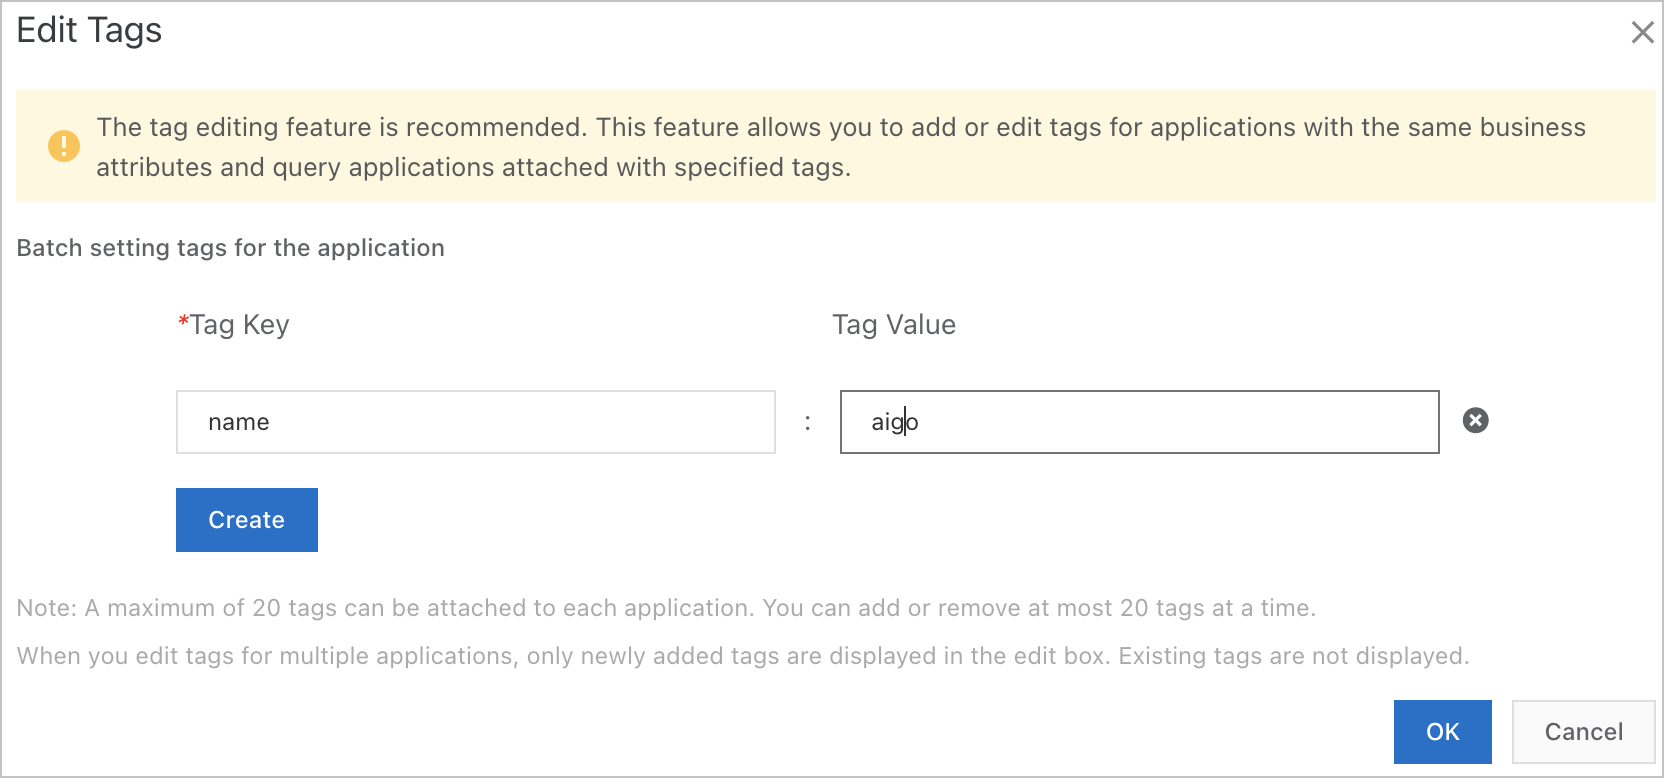 Set the tag key and tag value